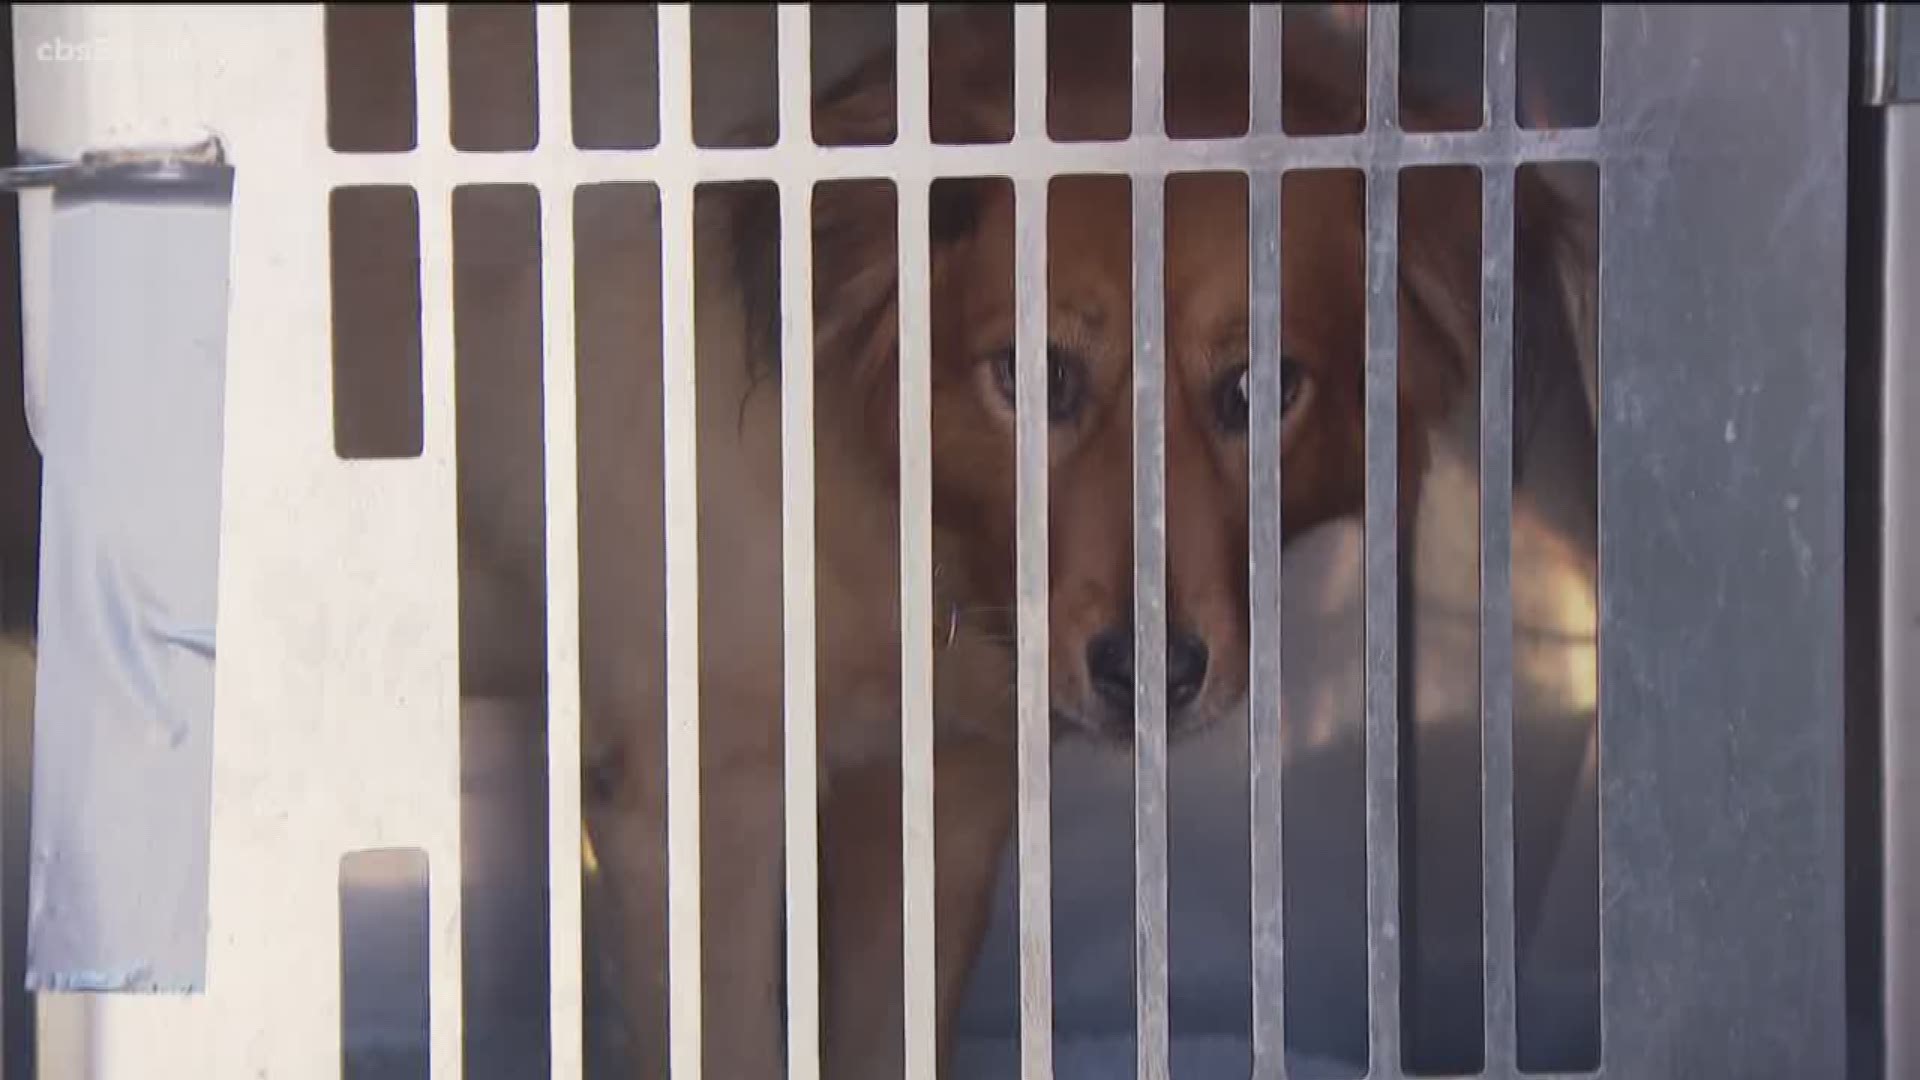 More than 30 dogs arrived at Rancho Coastal Humane Society Tuesday after being flown in from a shelter in Mississippi.